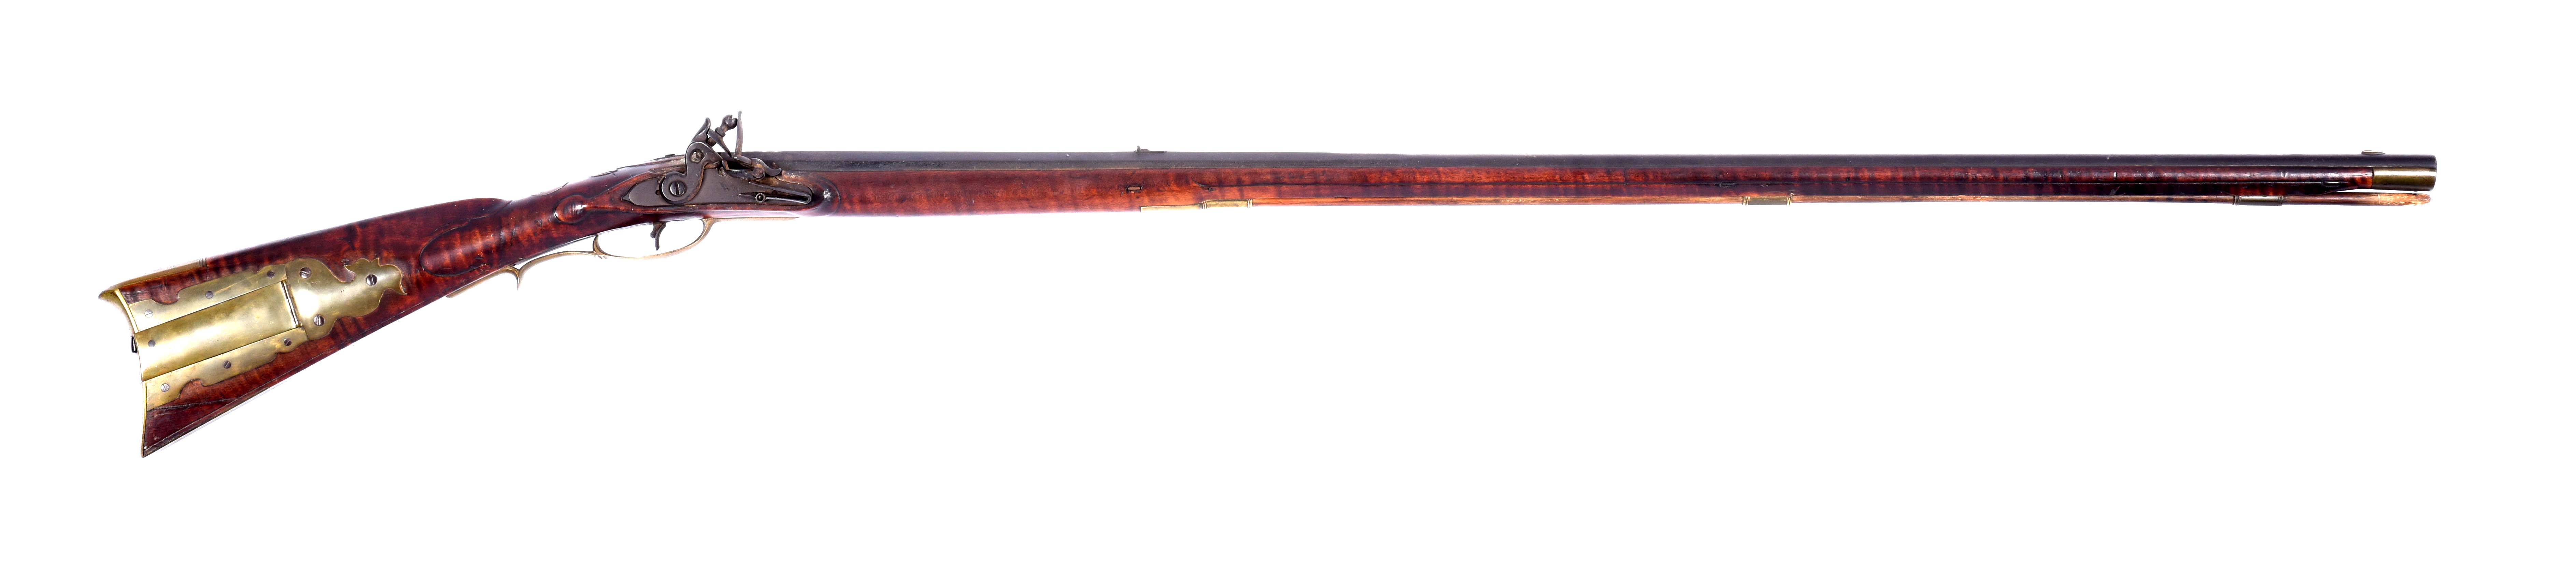 Fine Relief Carved Flintlock Kentucky Rifle Signed C. Beck, estimated at $30,000-50,000.